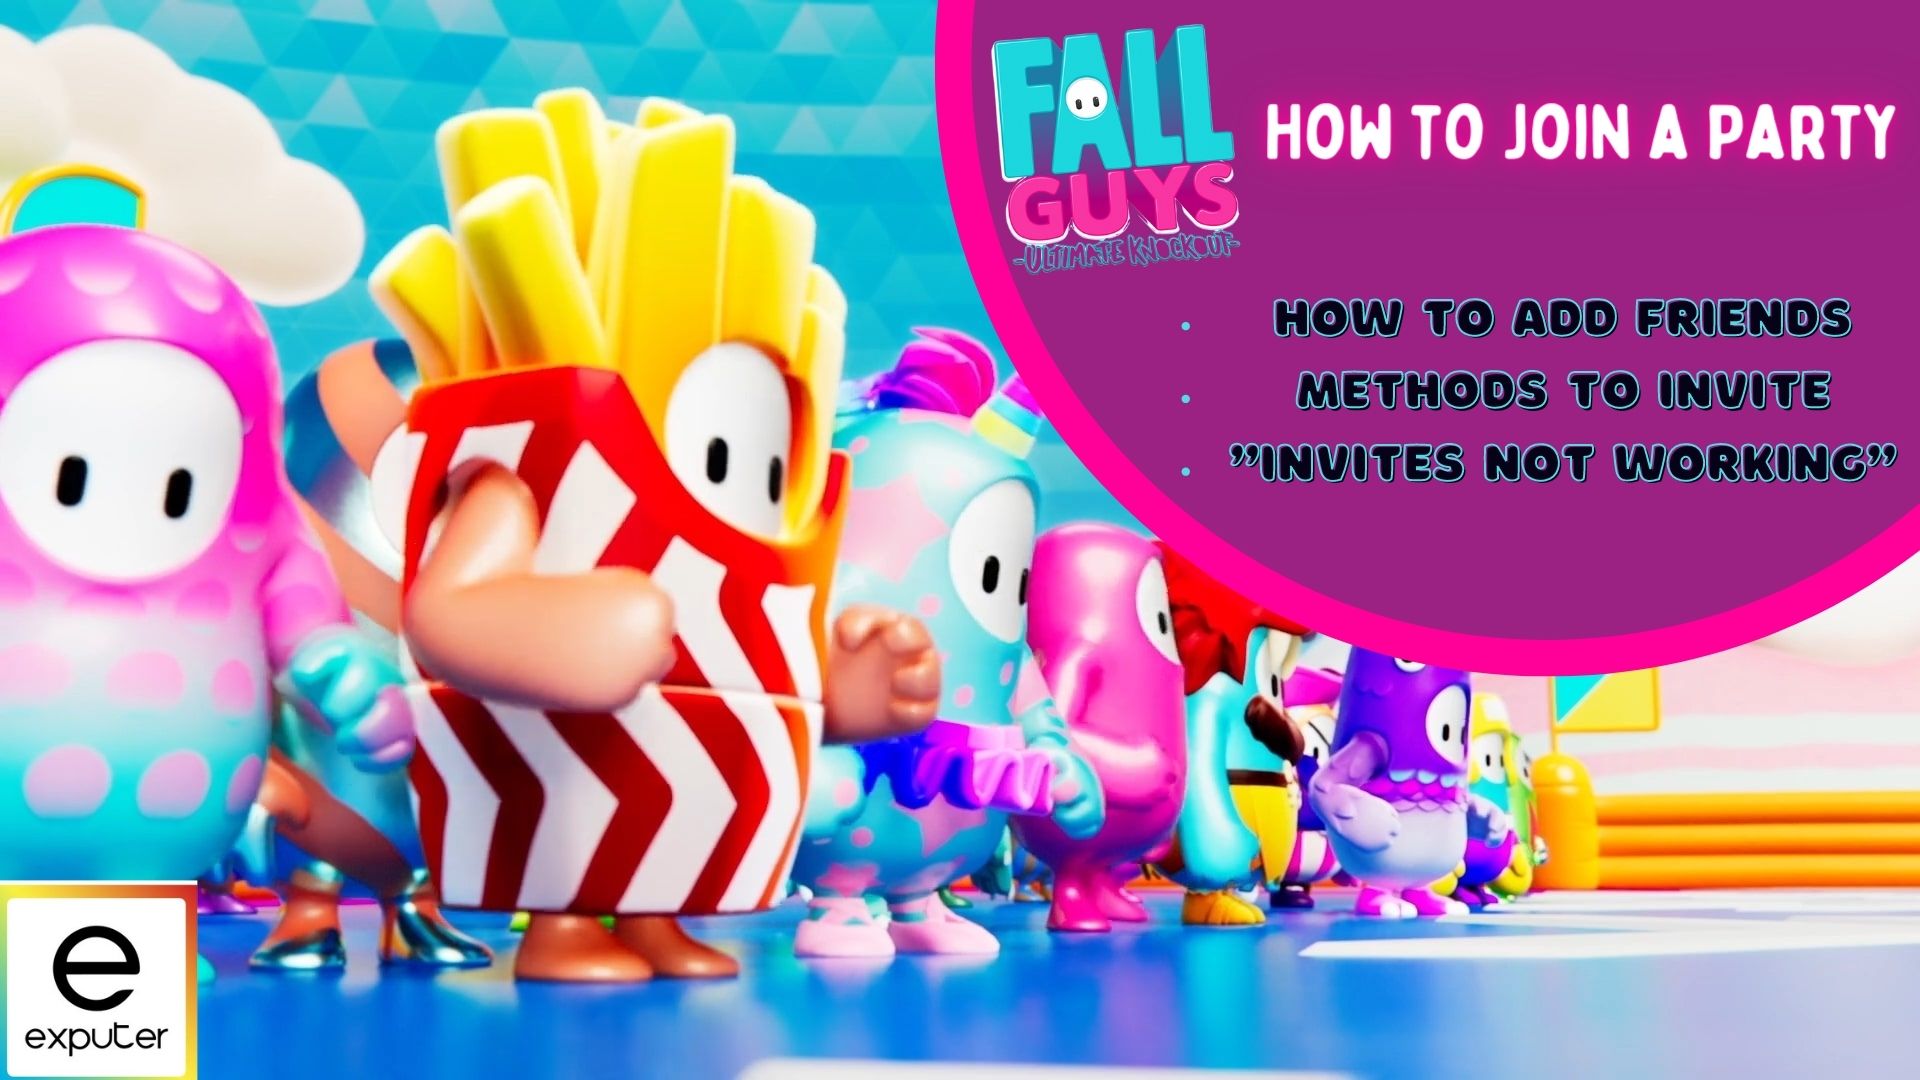 Fall Guys: How To Join a Party - PlayStation, Xbox, & Switch